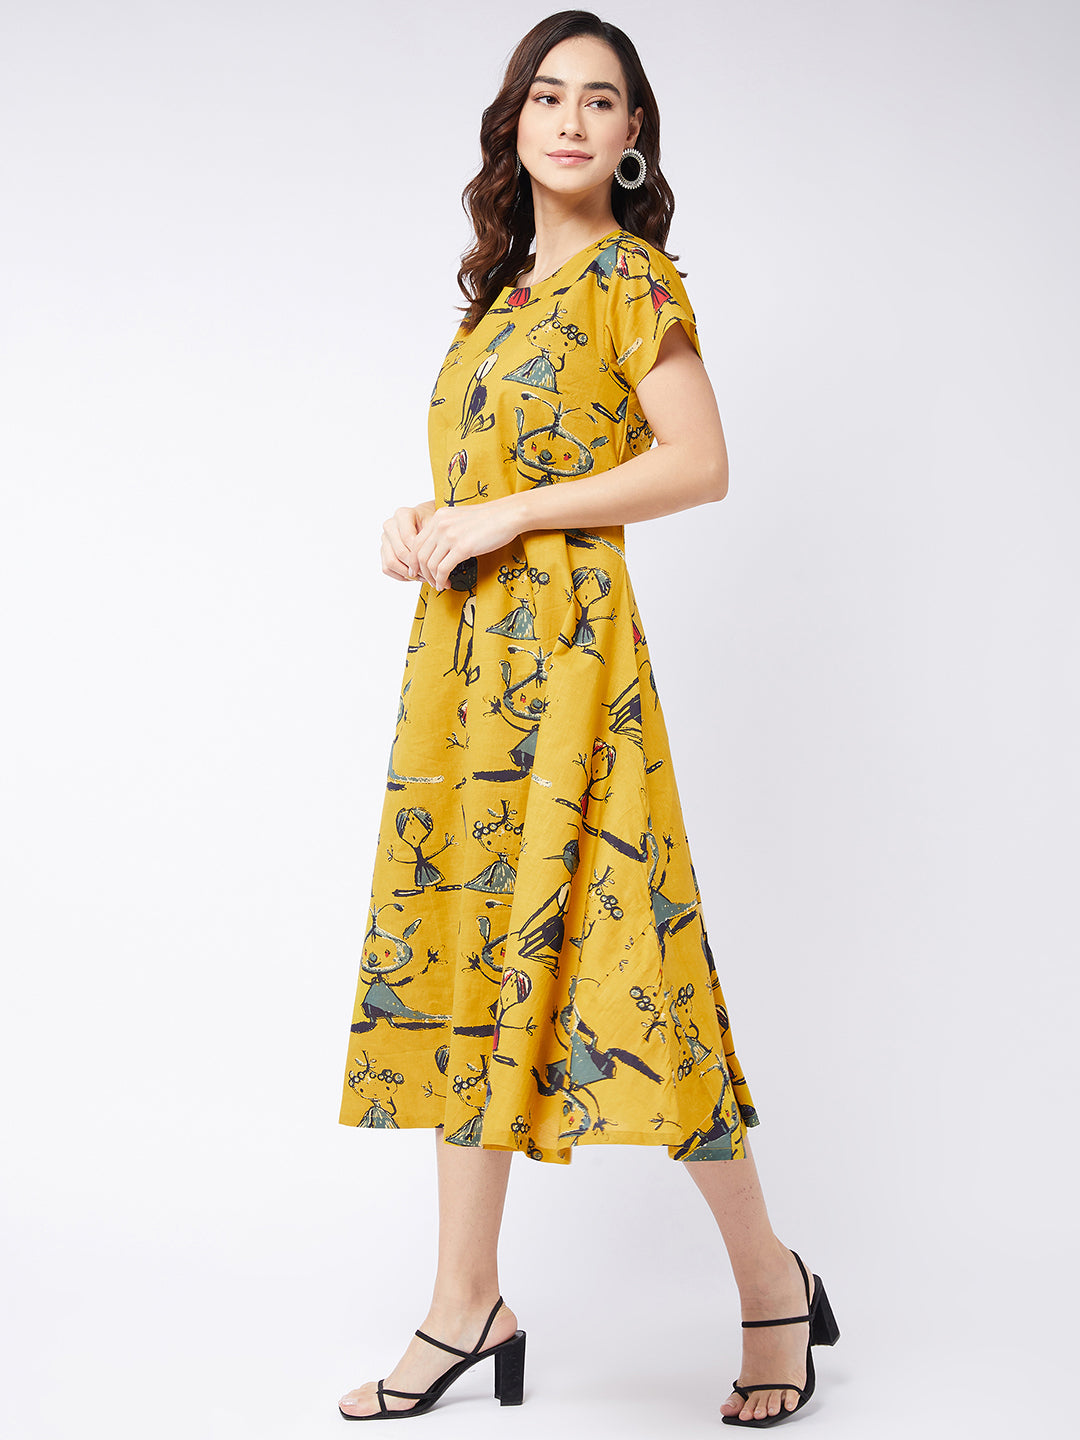 Quirky A-Line Dress